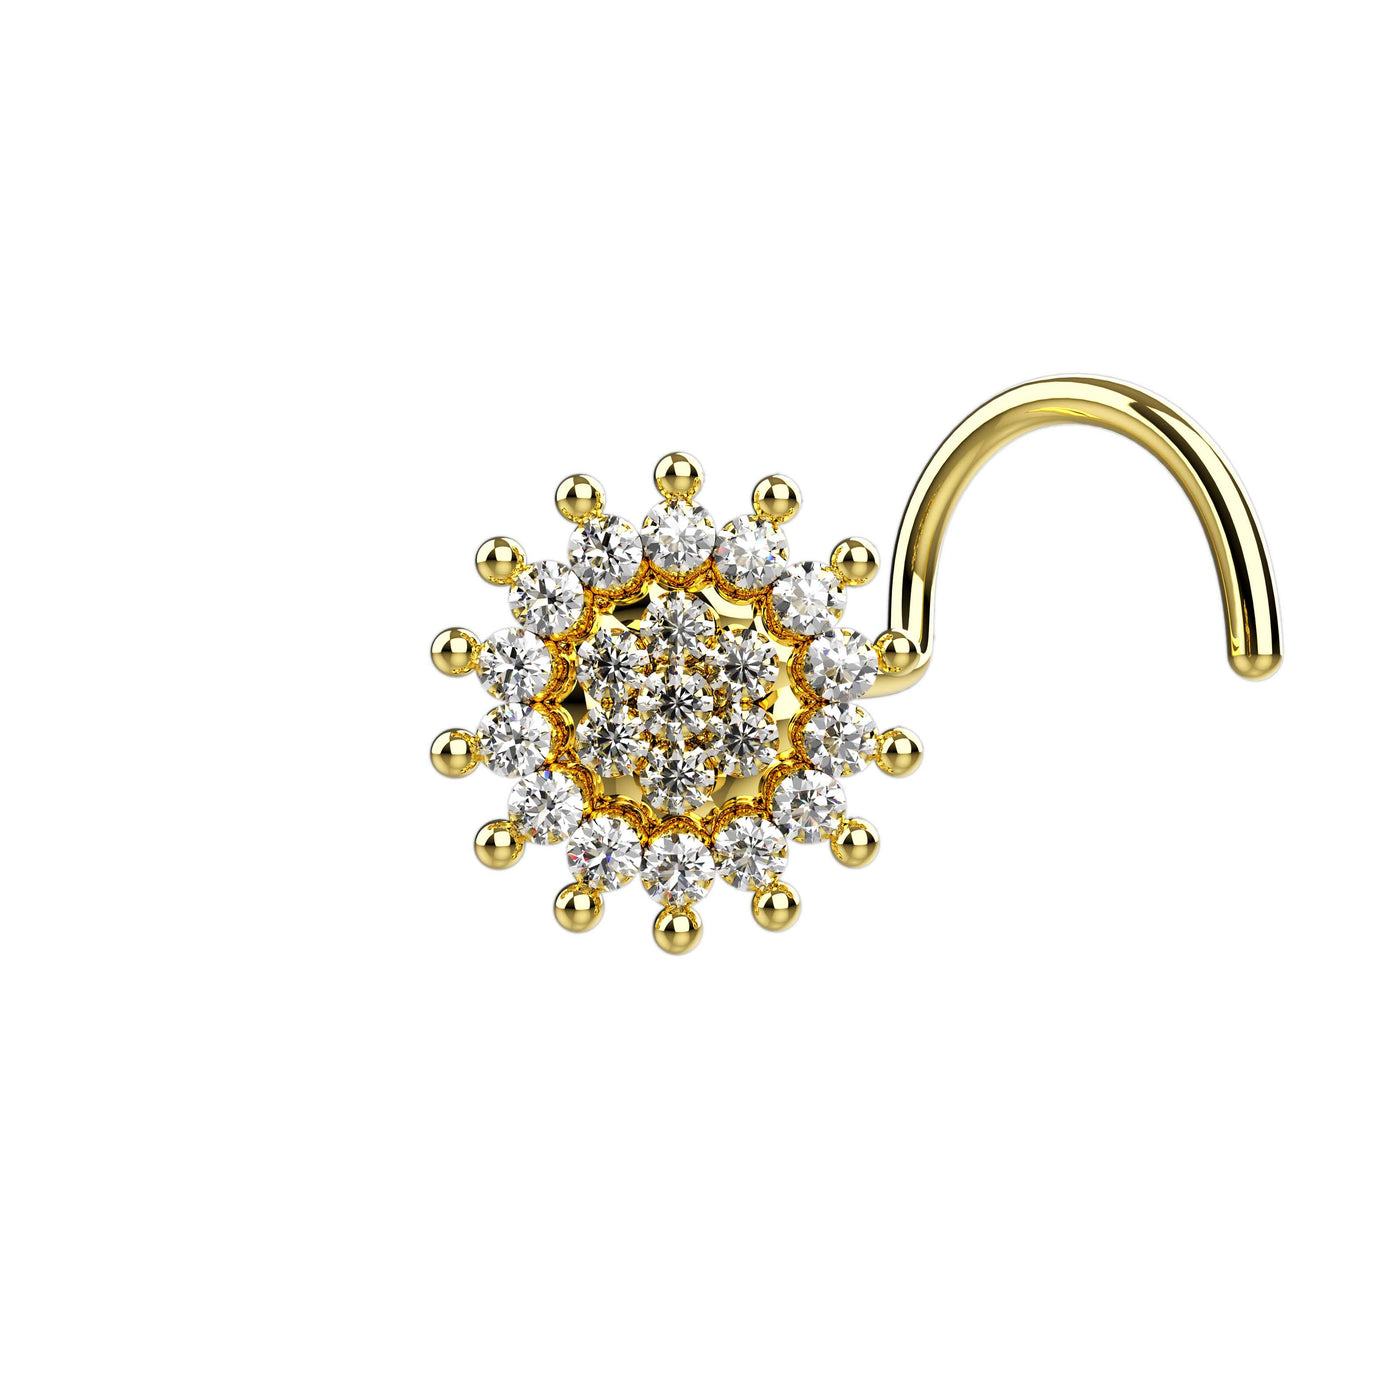 Fashionable gold nose stud rings